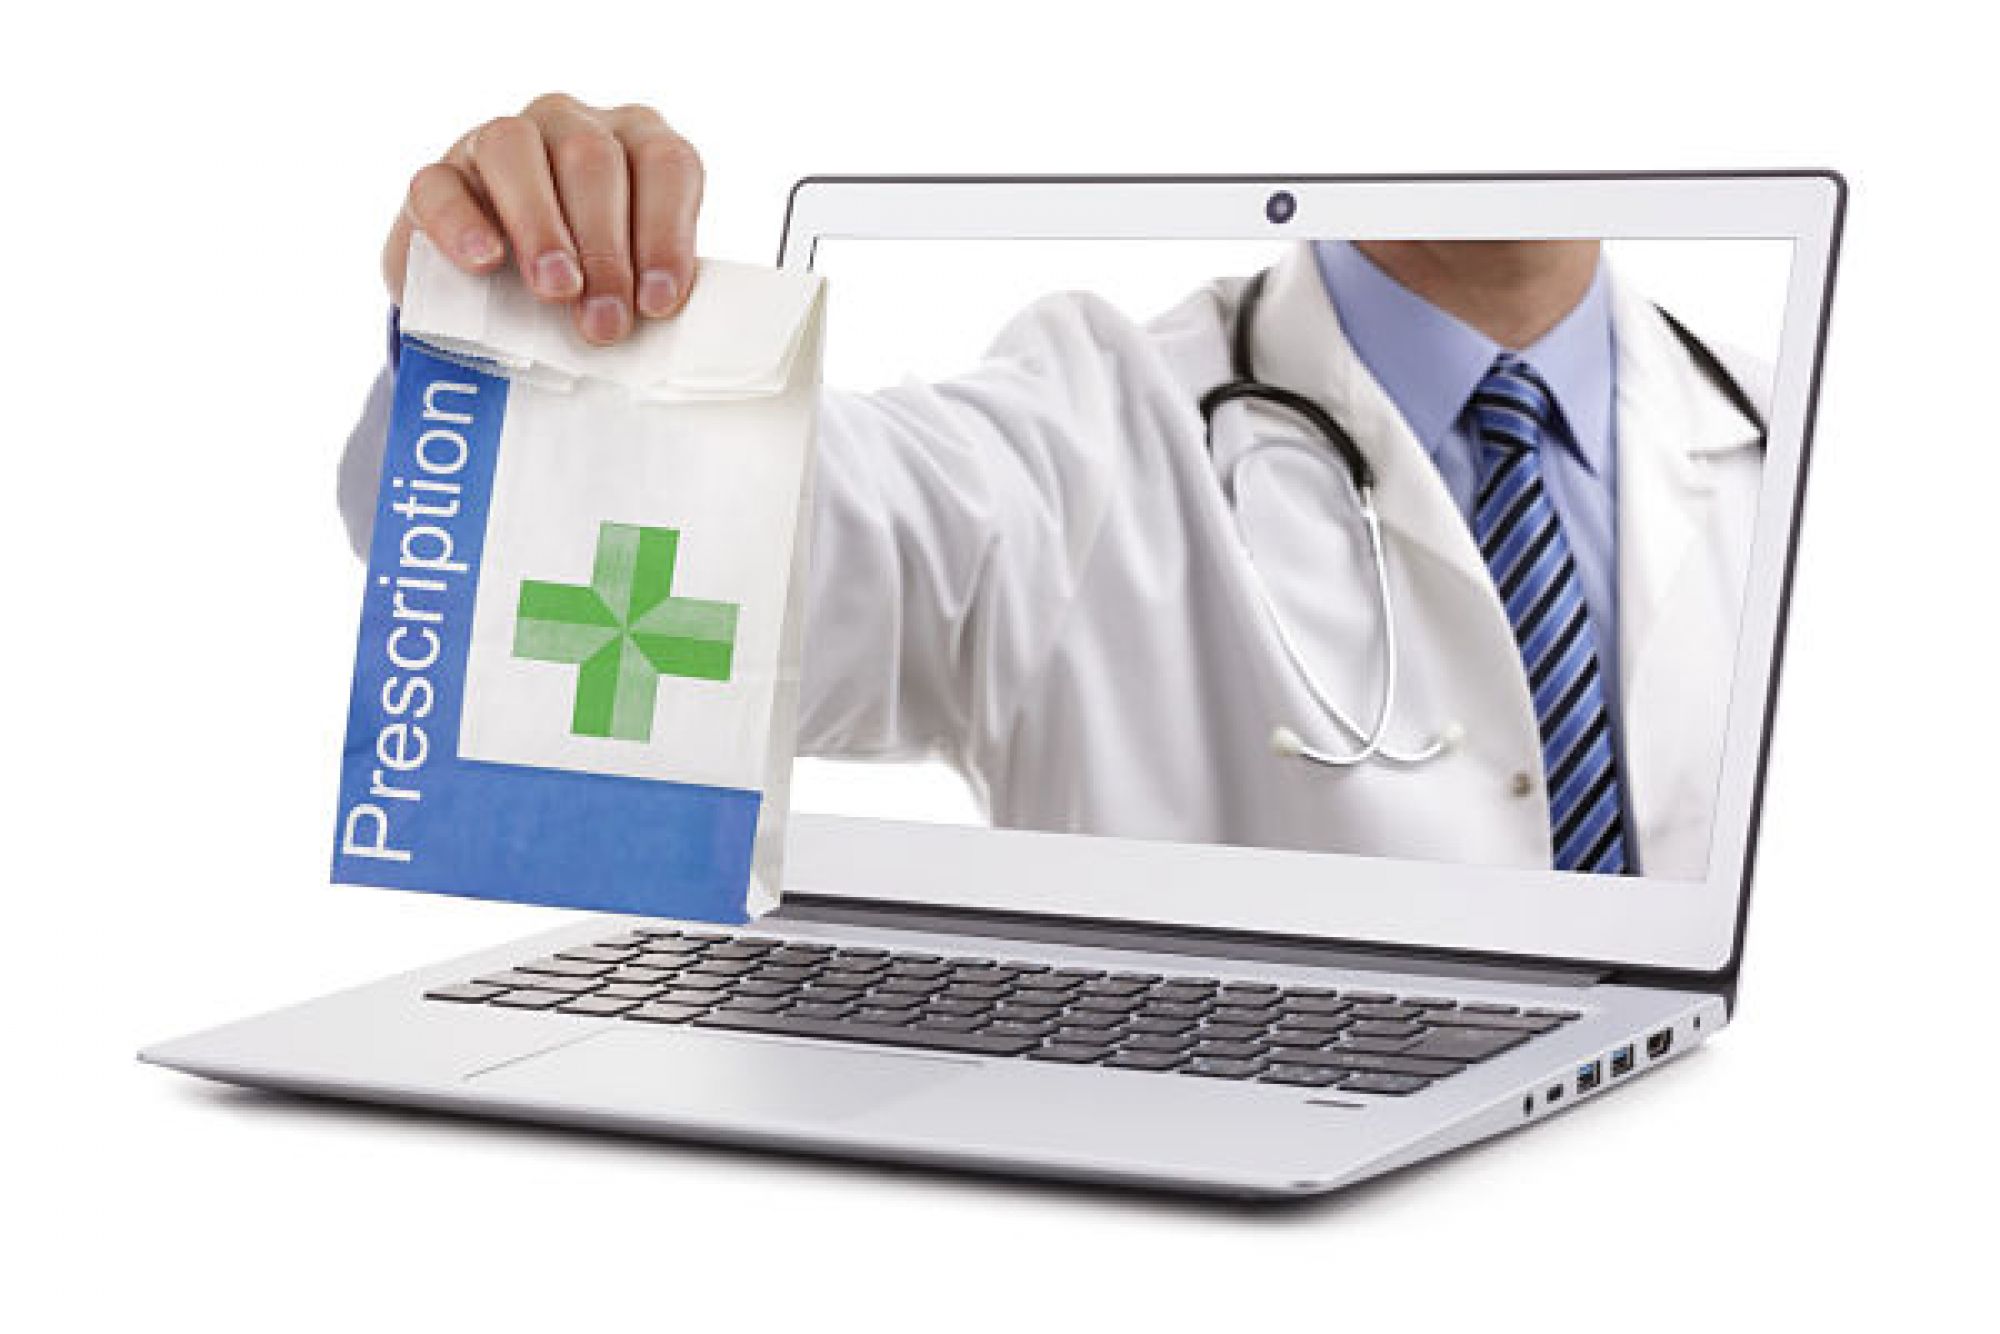 E-prescribing (e-Rx) Market Future Aspect Analysis and Current Trends by 2016 to 2030